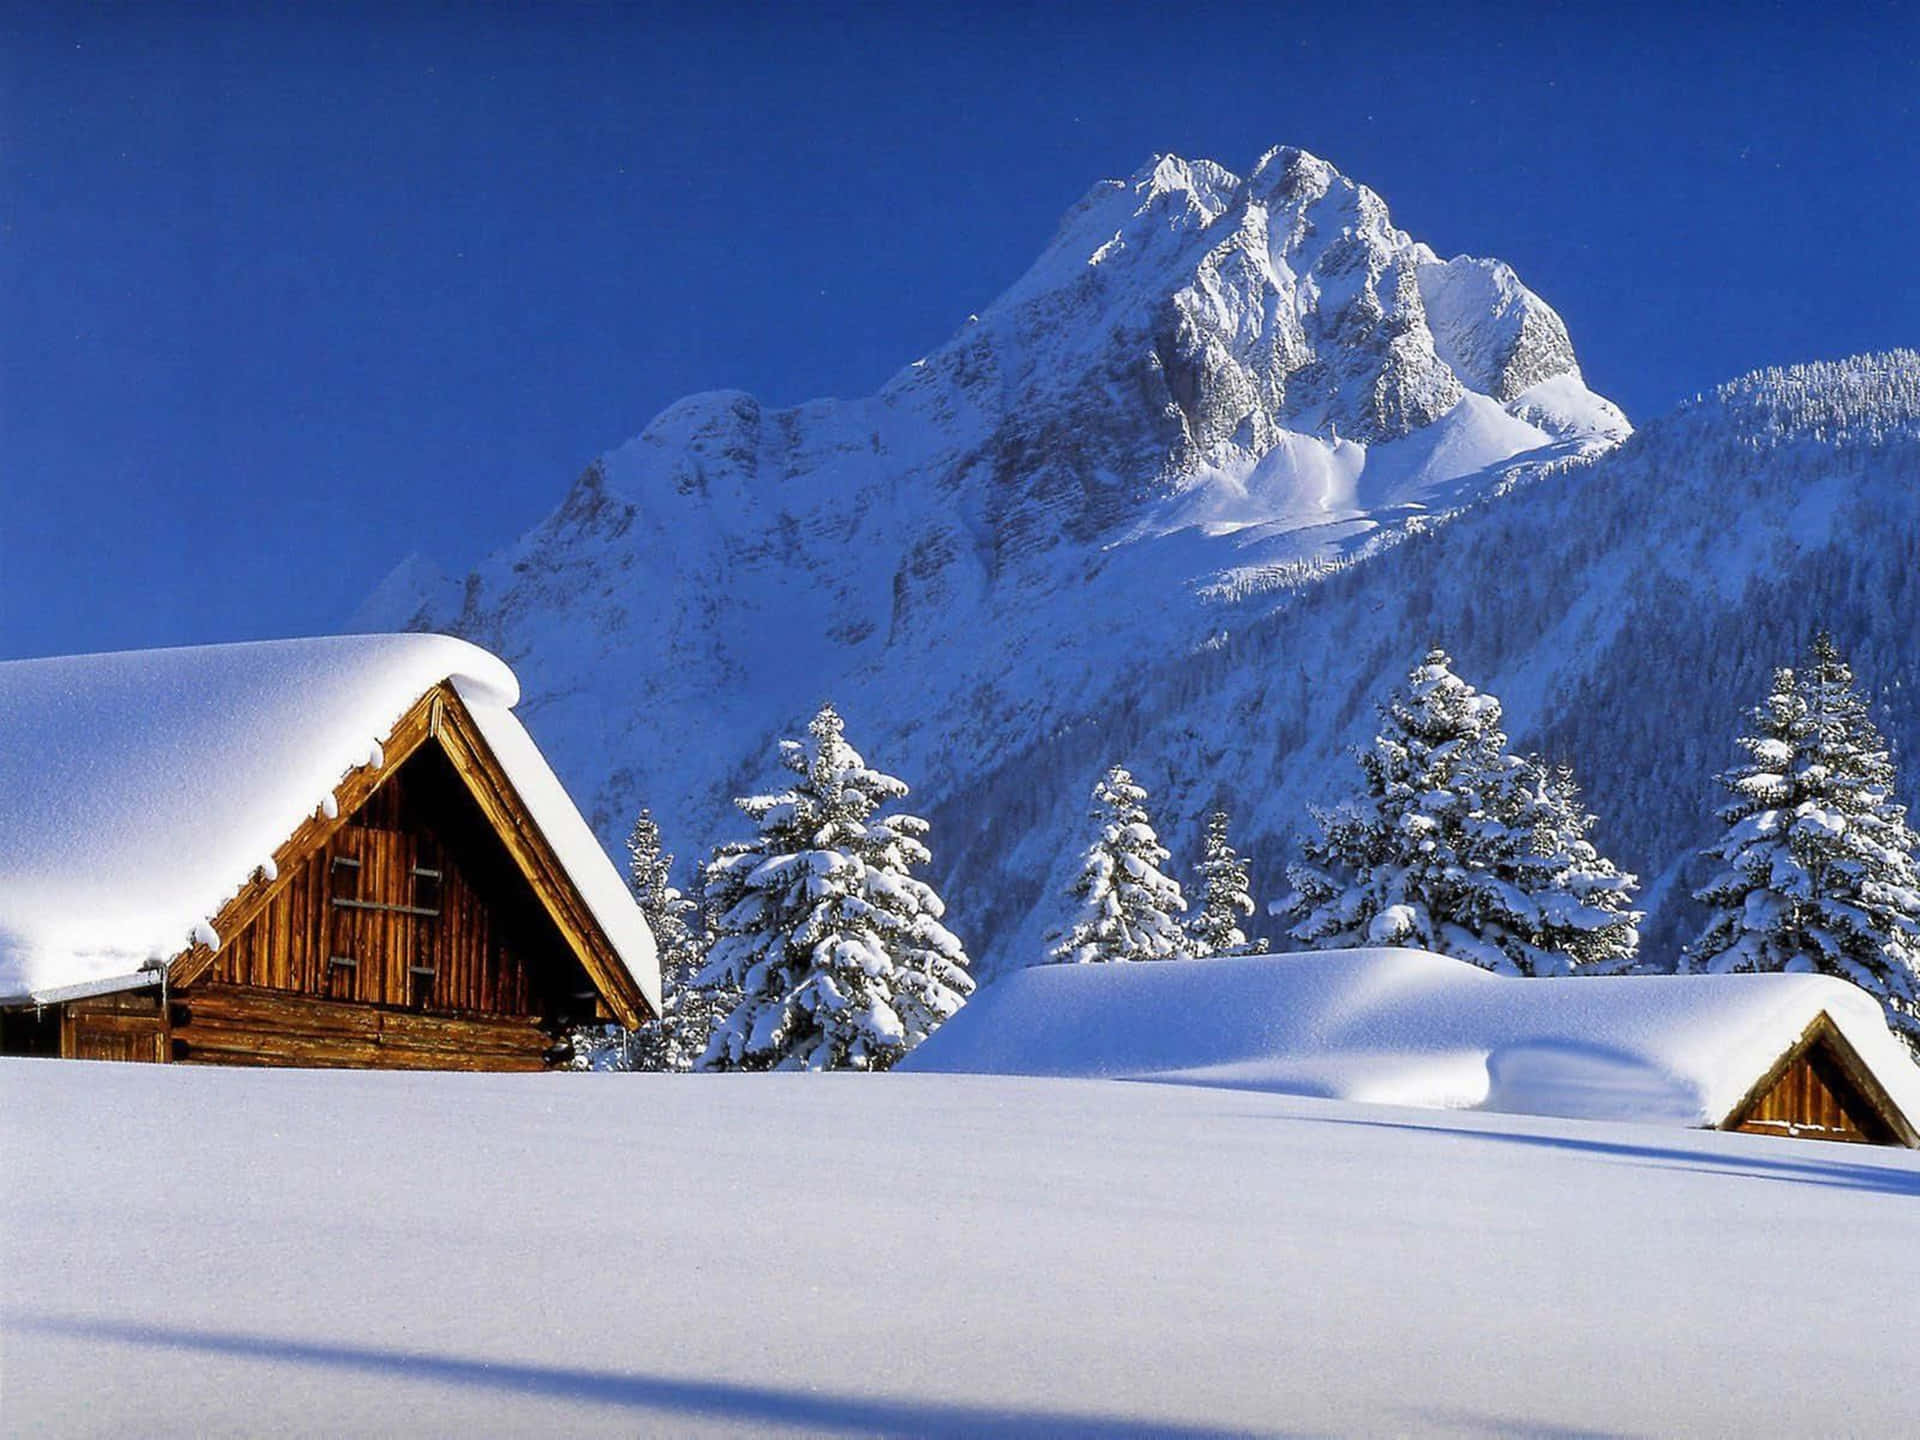 Log Cabins In The Alps With Snow 4K Wallpaper